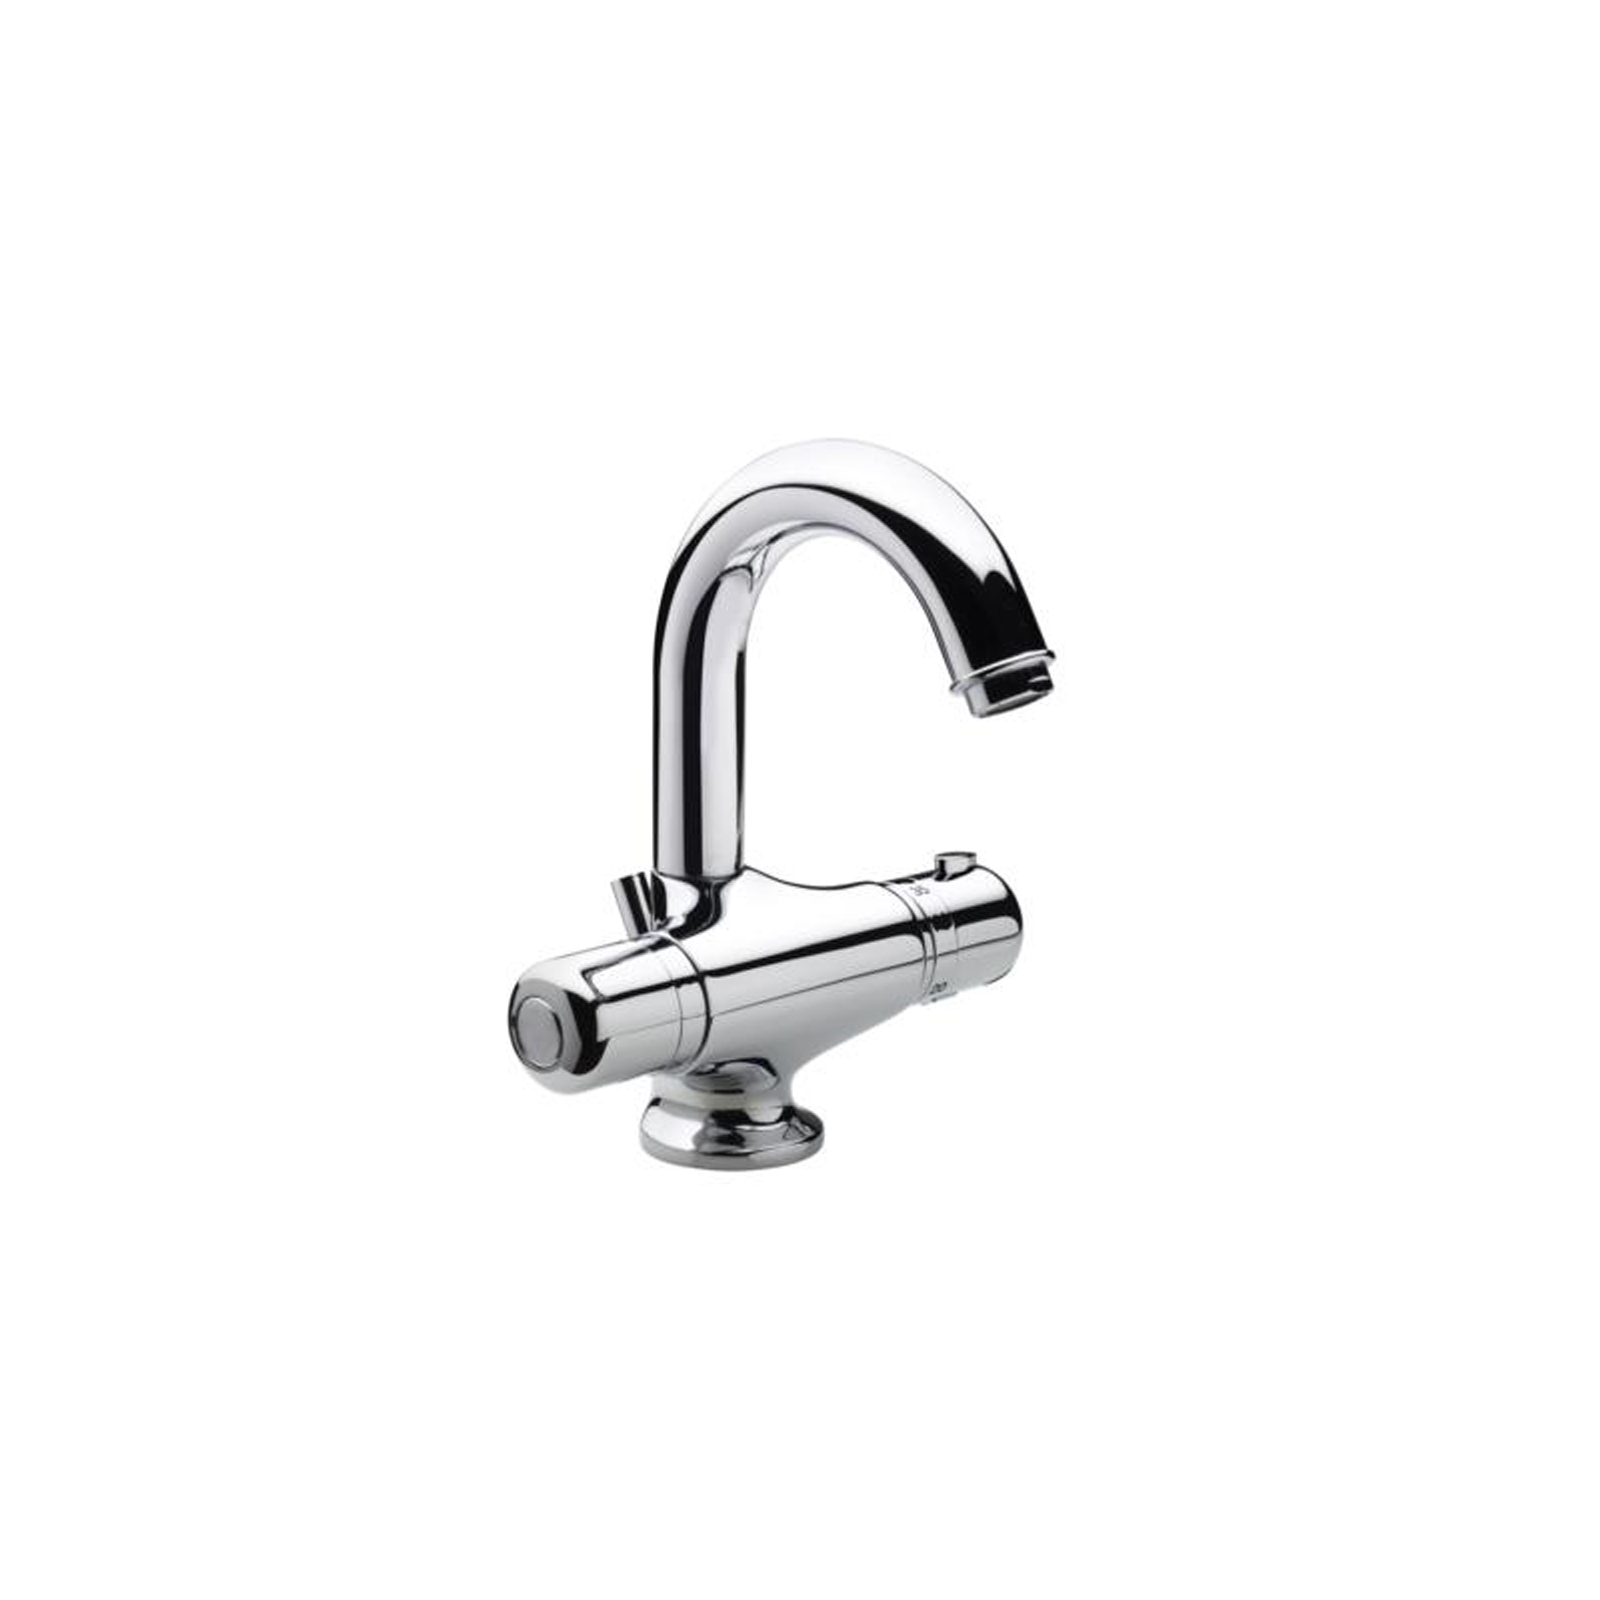 Thermostatic mixer with swivel spout